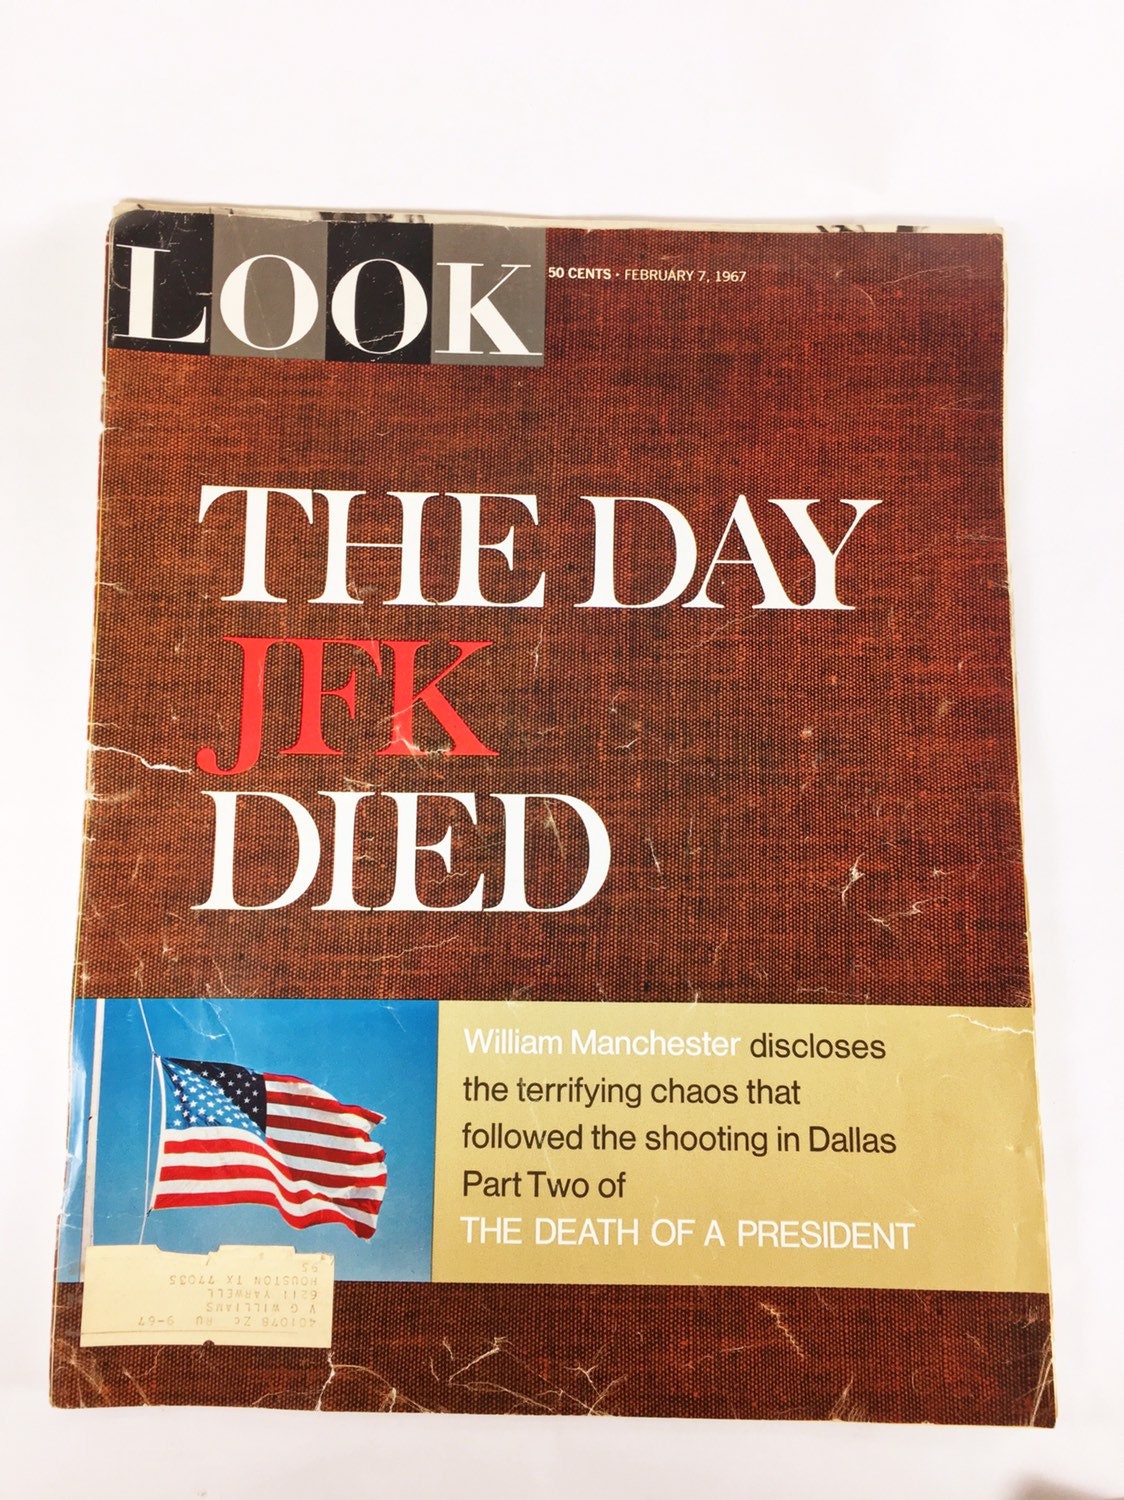 1967 Vintage JFK Look Magazine lot. Manchester Death of a President set. Collector gift vol 31, no 2, no 3 no 4, no 5. President Kennedy